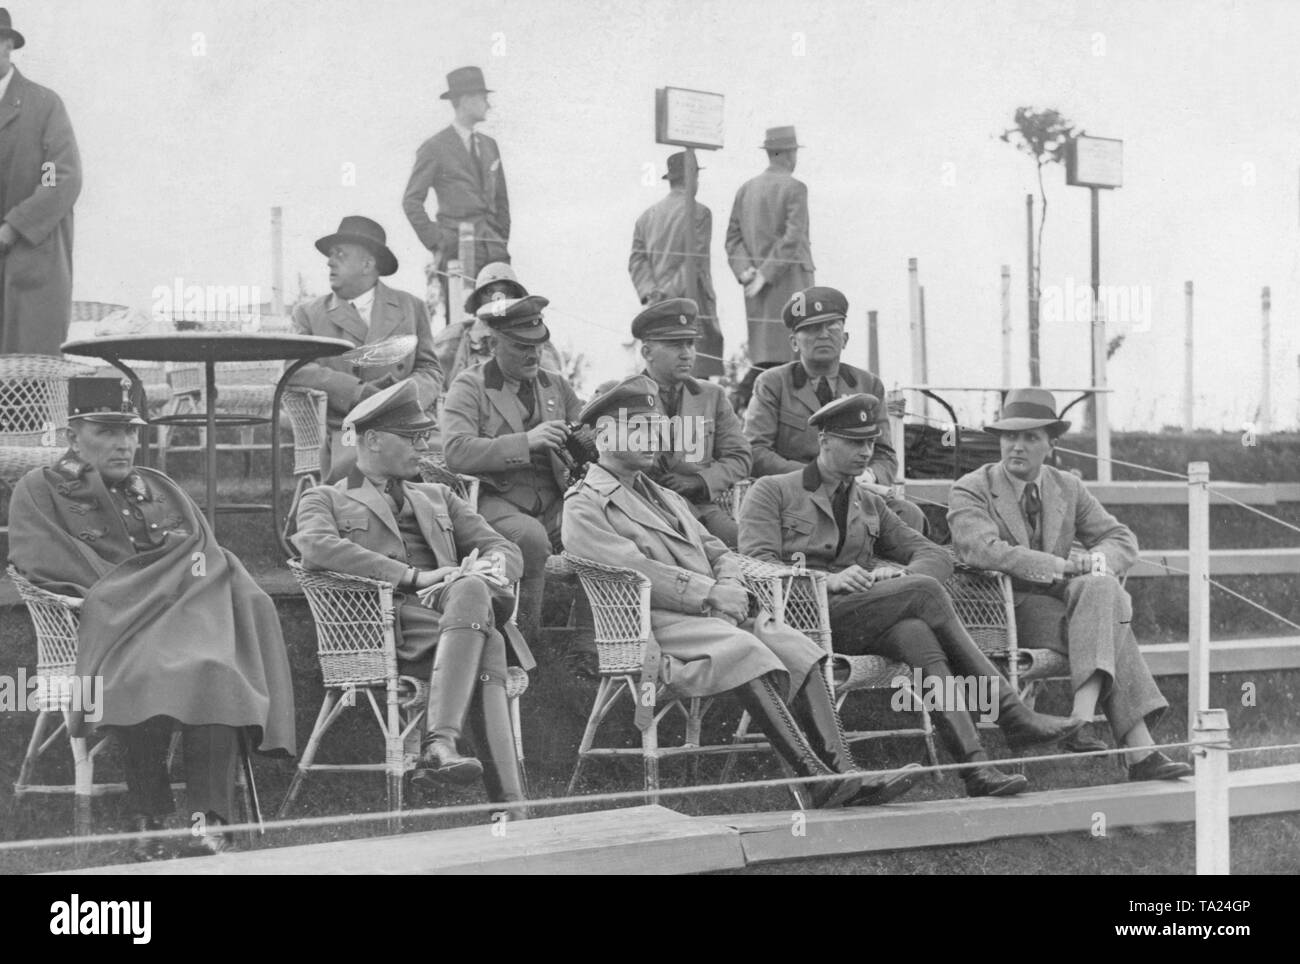 Carl Eduard of Saxony-Coburg and Gotha as well as Prince Wilhelm of Prussia sitting in the grandstand at a Stahlhelm meeting. Stock Photo